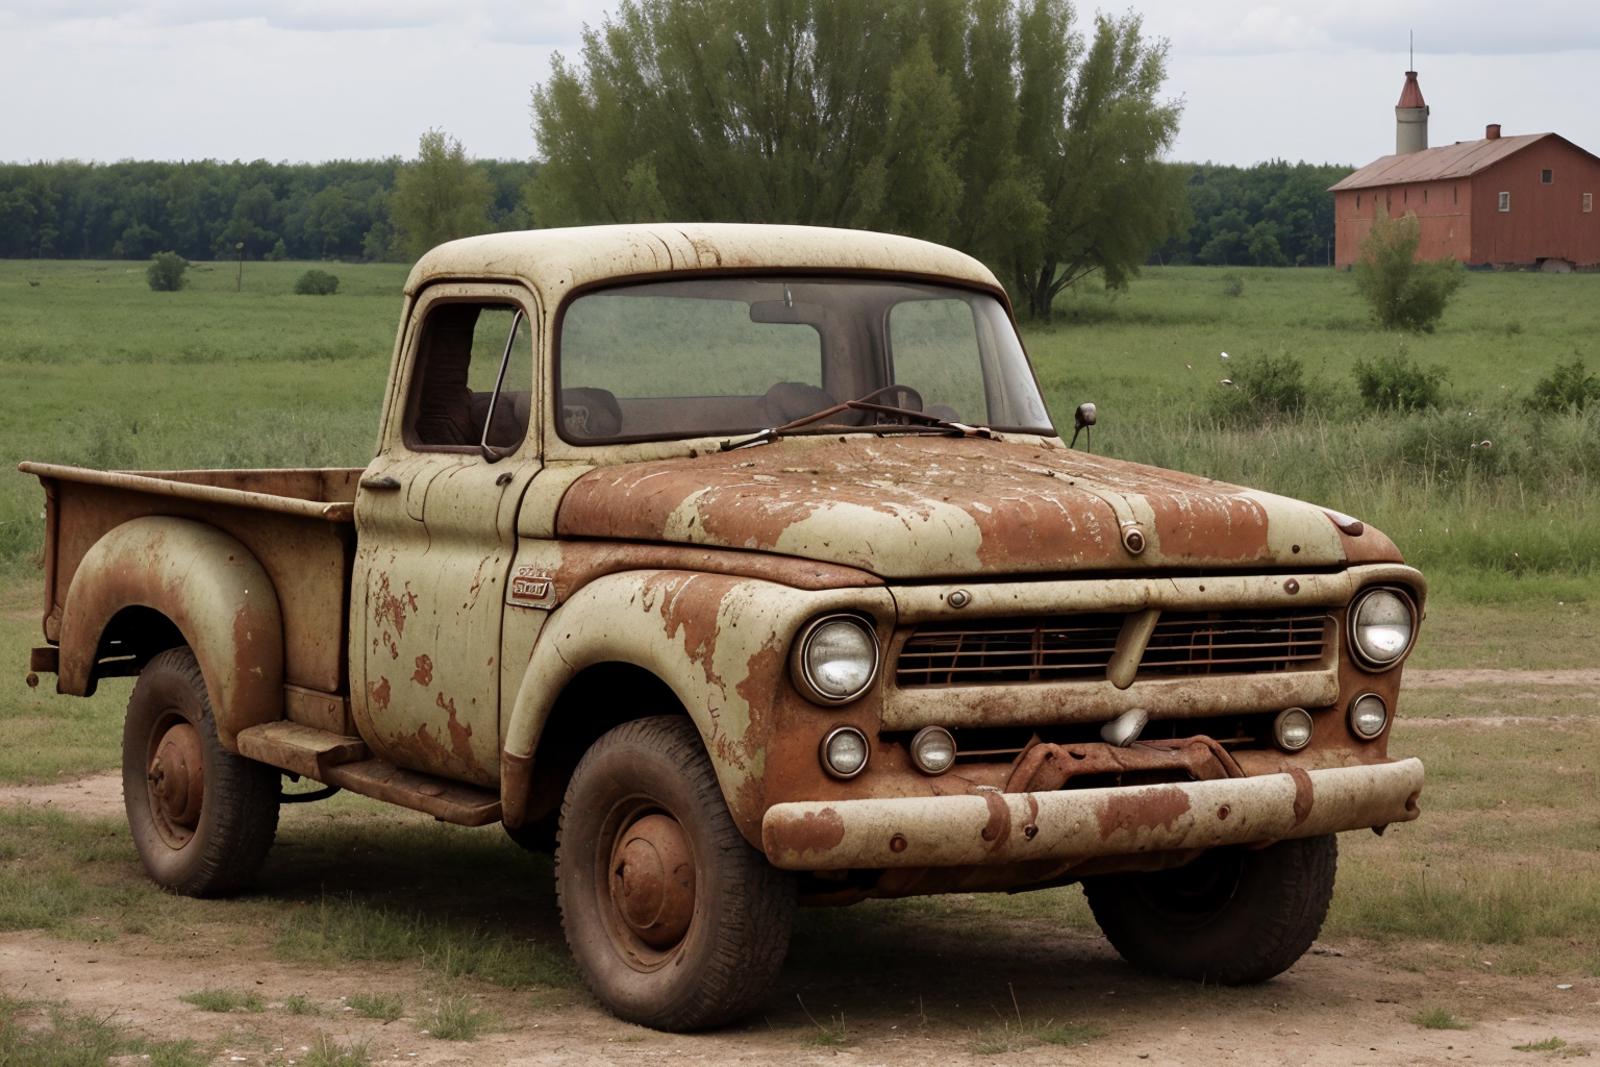 A rusty old truck parked on a dirt road.